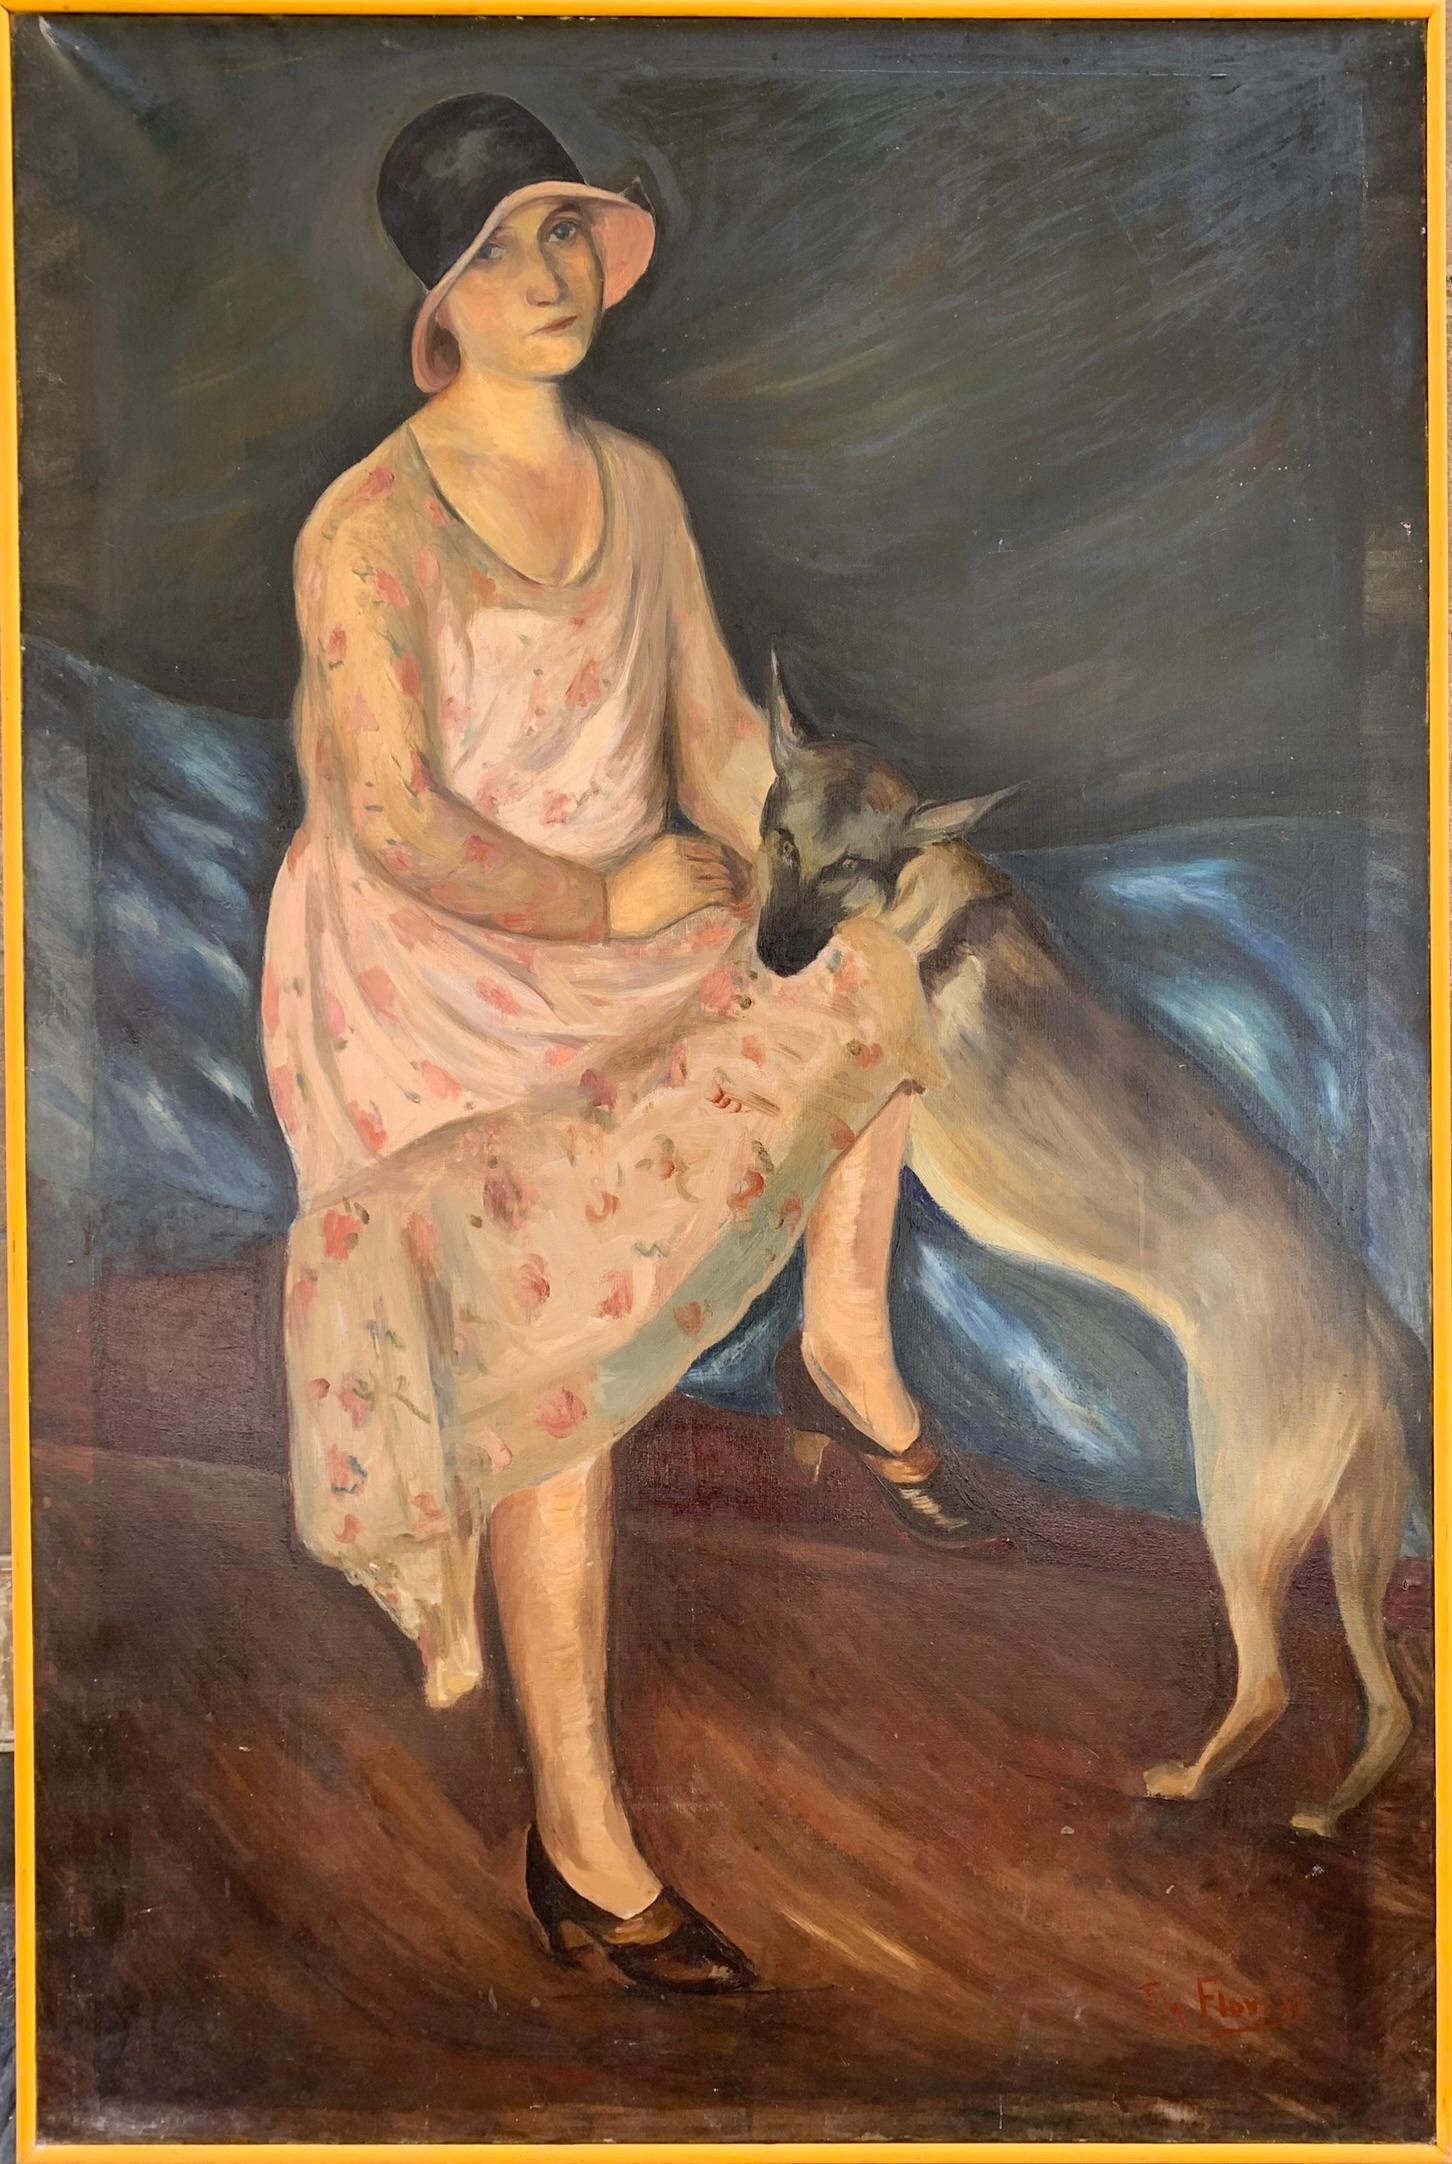 Constantin (Tin) Florias  Portrait Painting - 1920s Portrait of Lady with Dog with label from exibition in Paris in 1924. 